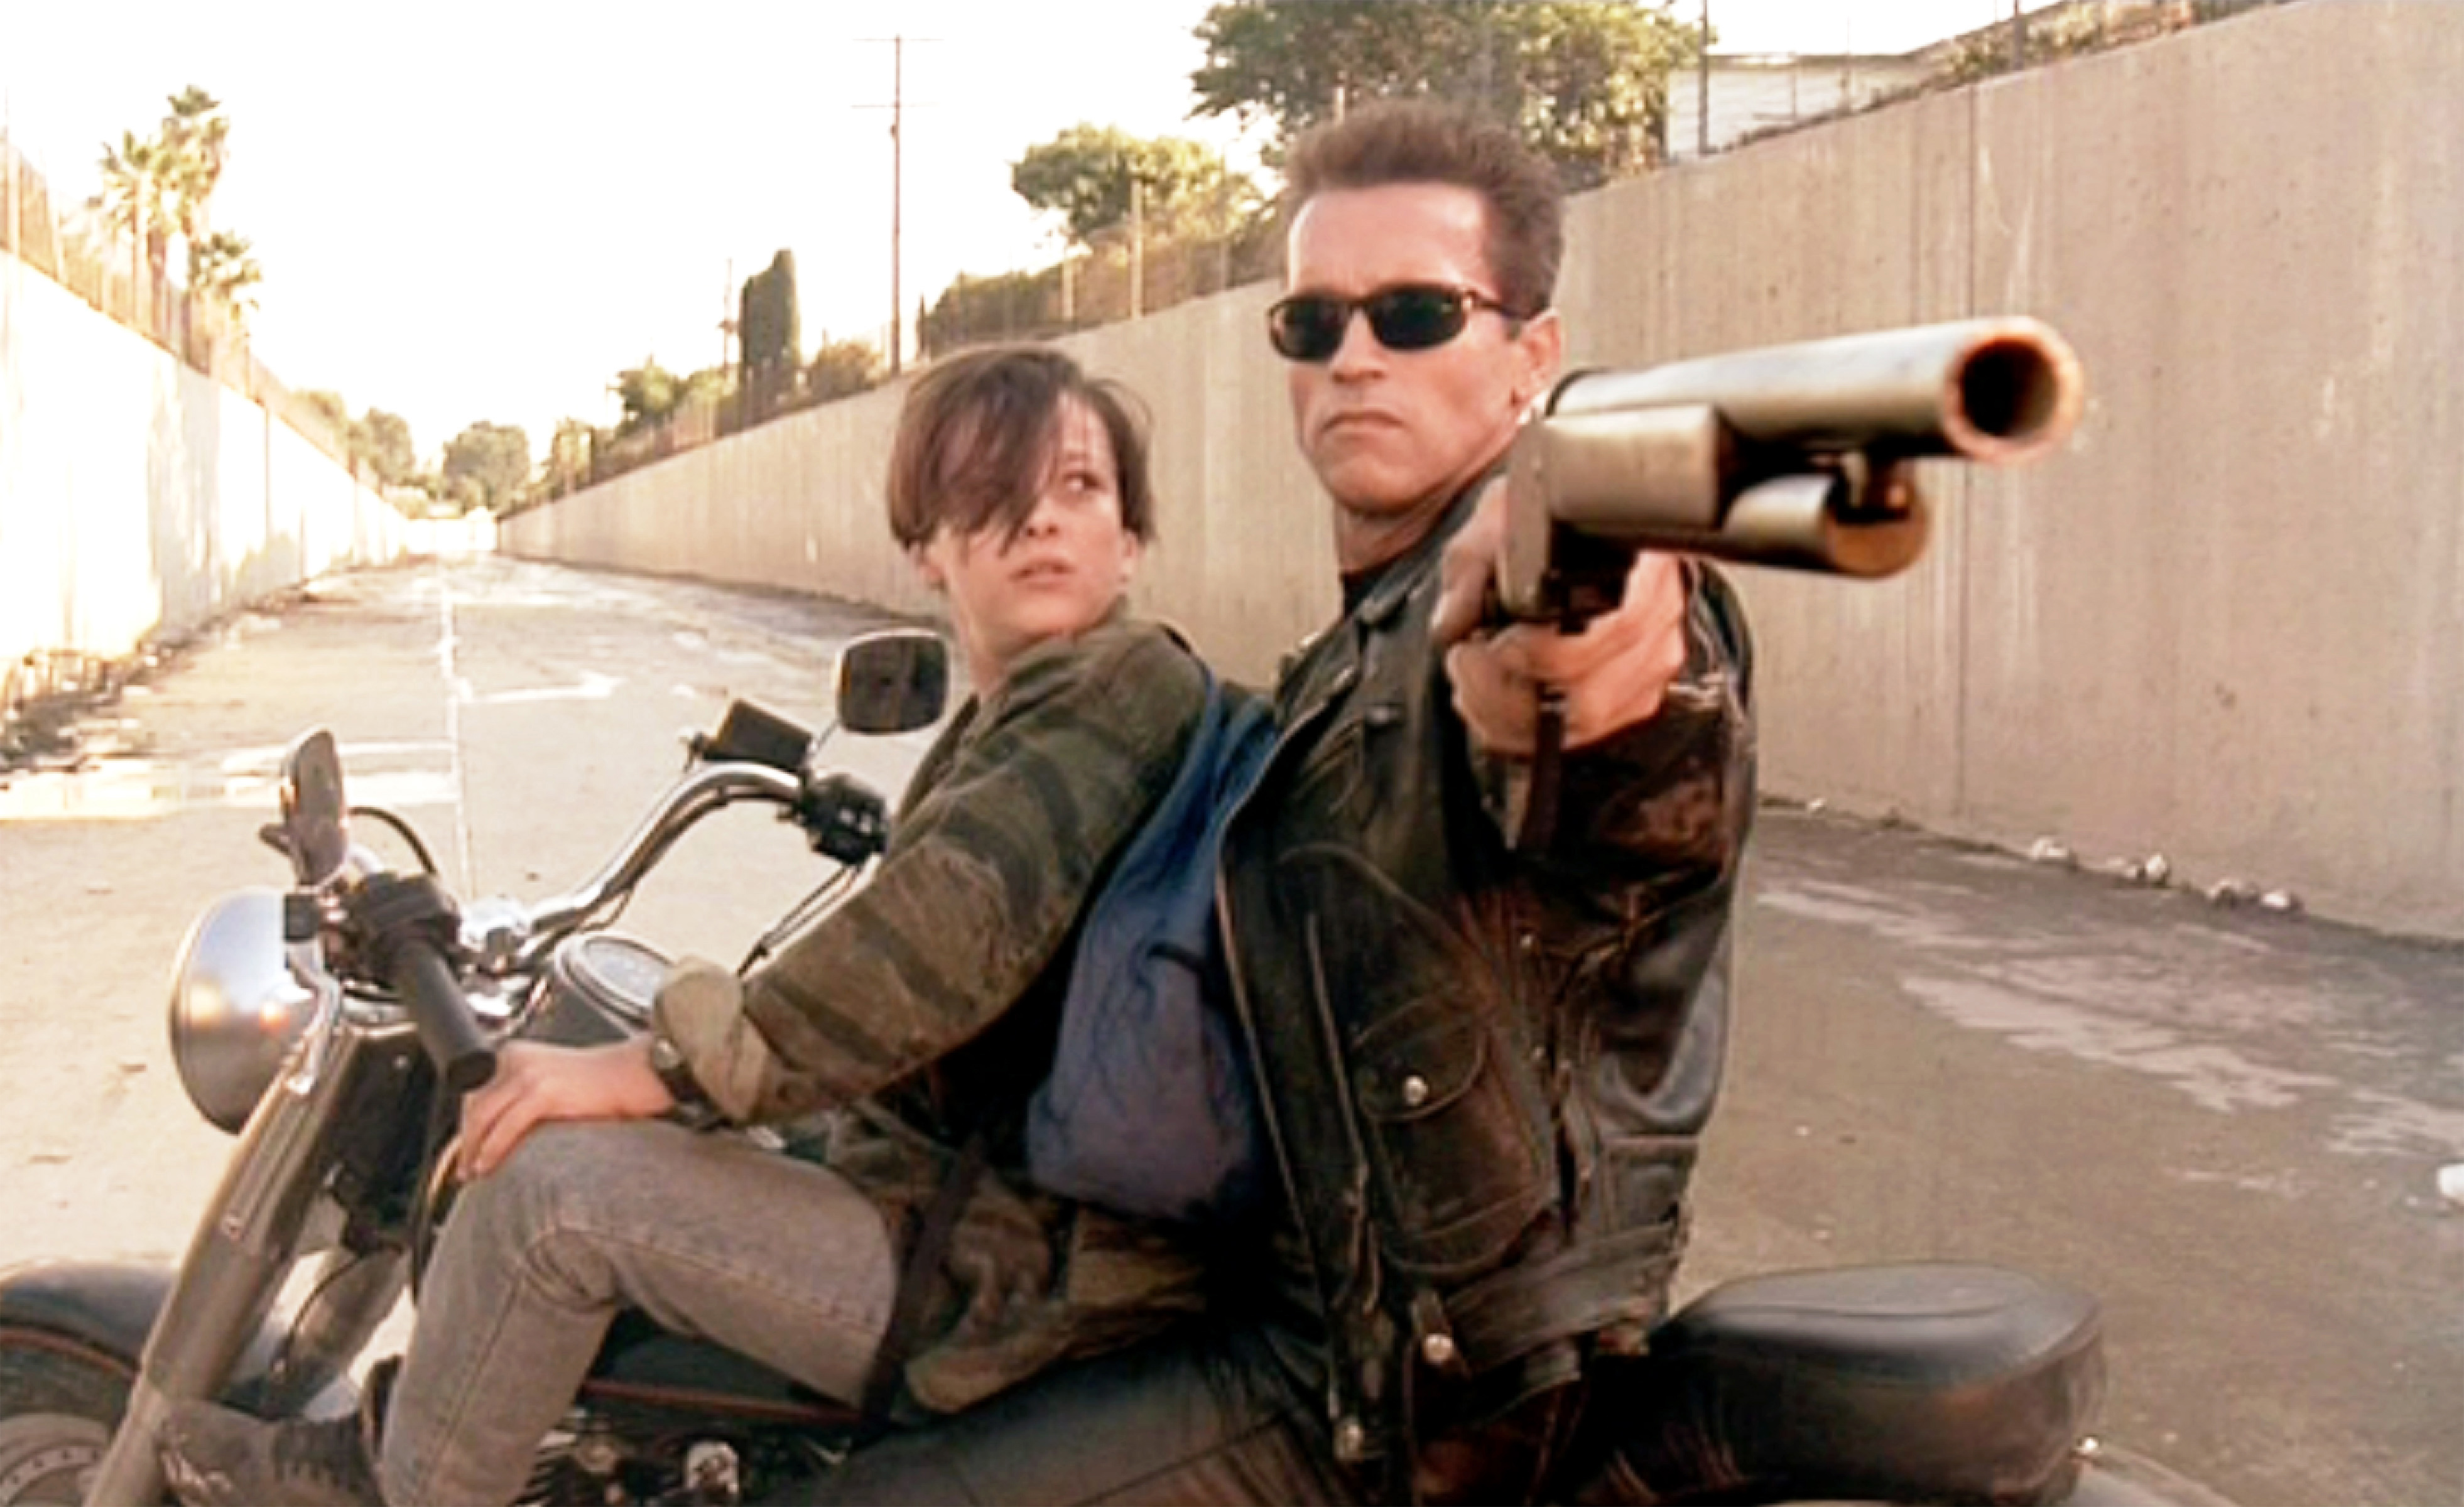 Edward Furlong as John Connor and Arnold Schwarzenegger as the Terminator on "Terminator 2: Judgment Day" released on July 3, 1991 | Source: Getty Images